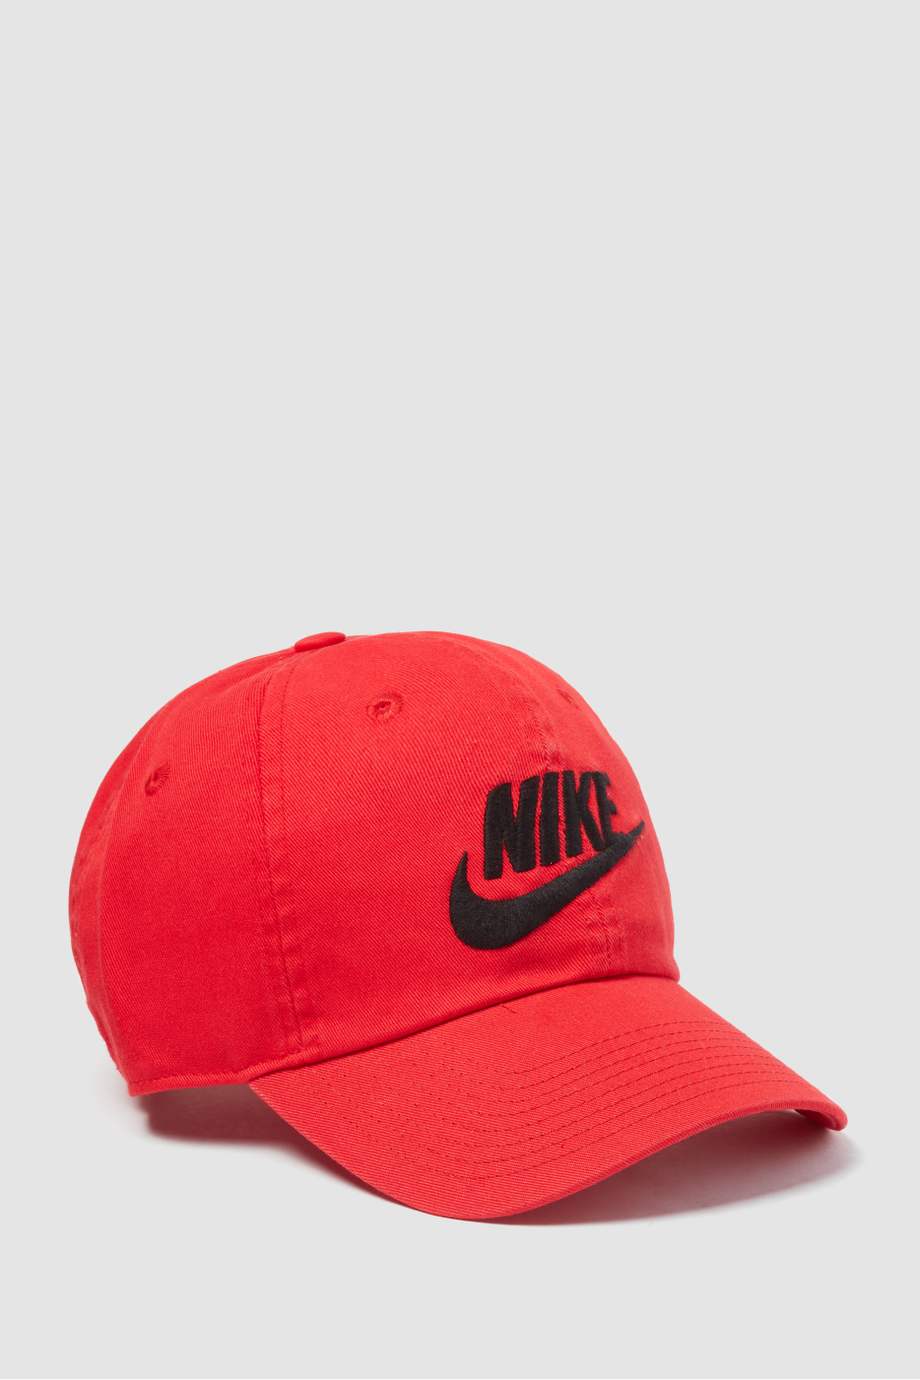 Nike Cap "Red" - ROOYAS